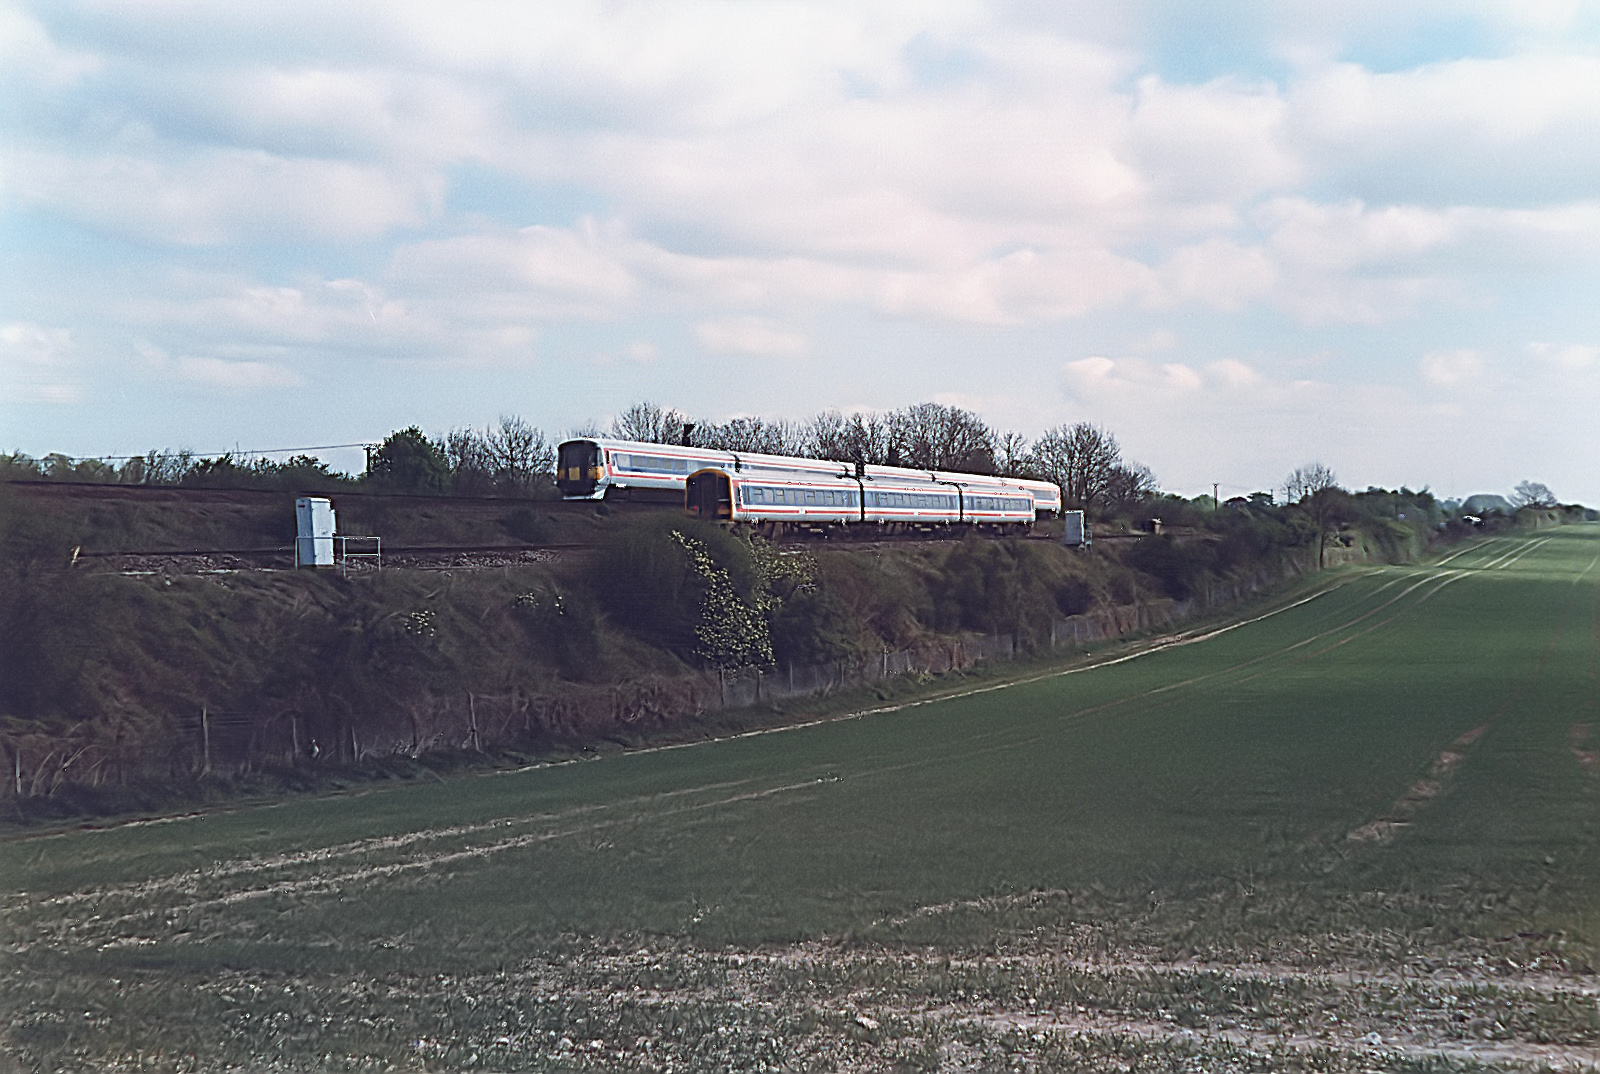 An unidentified 442 and 159 pass each other at Worting Junction.